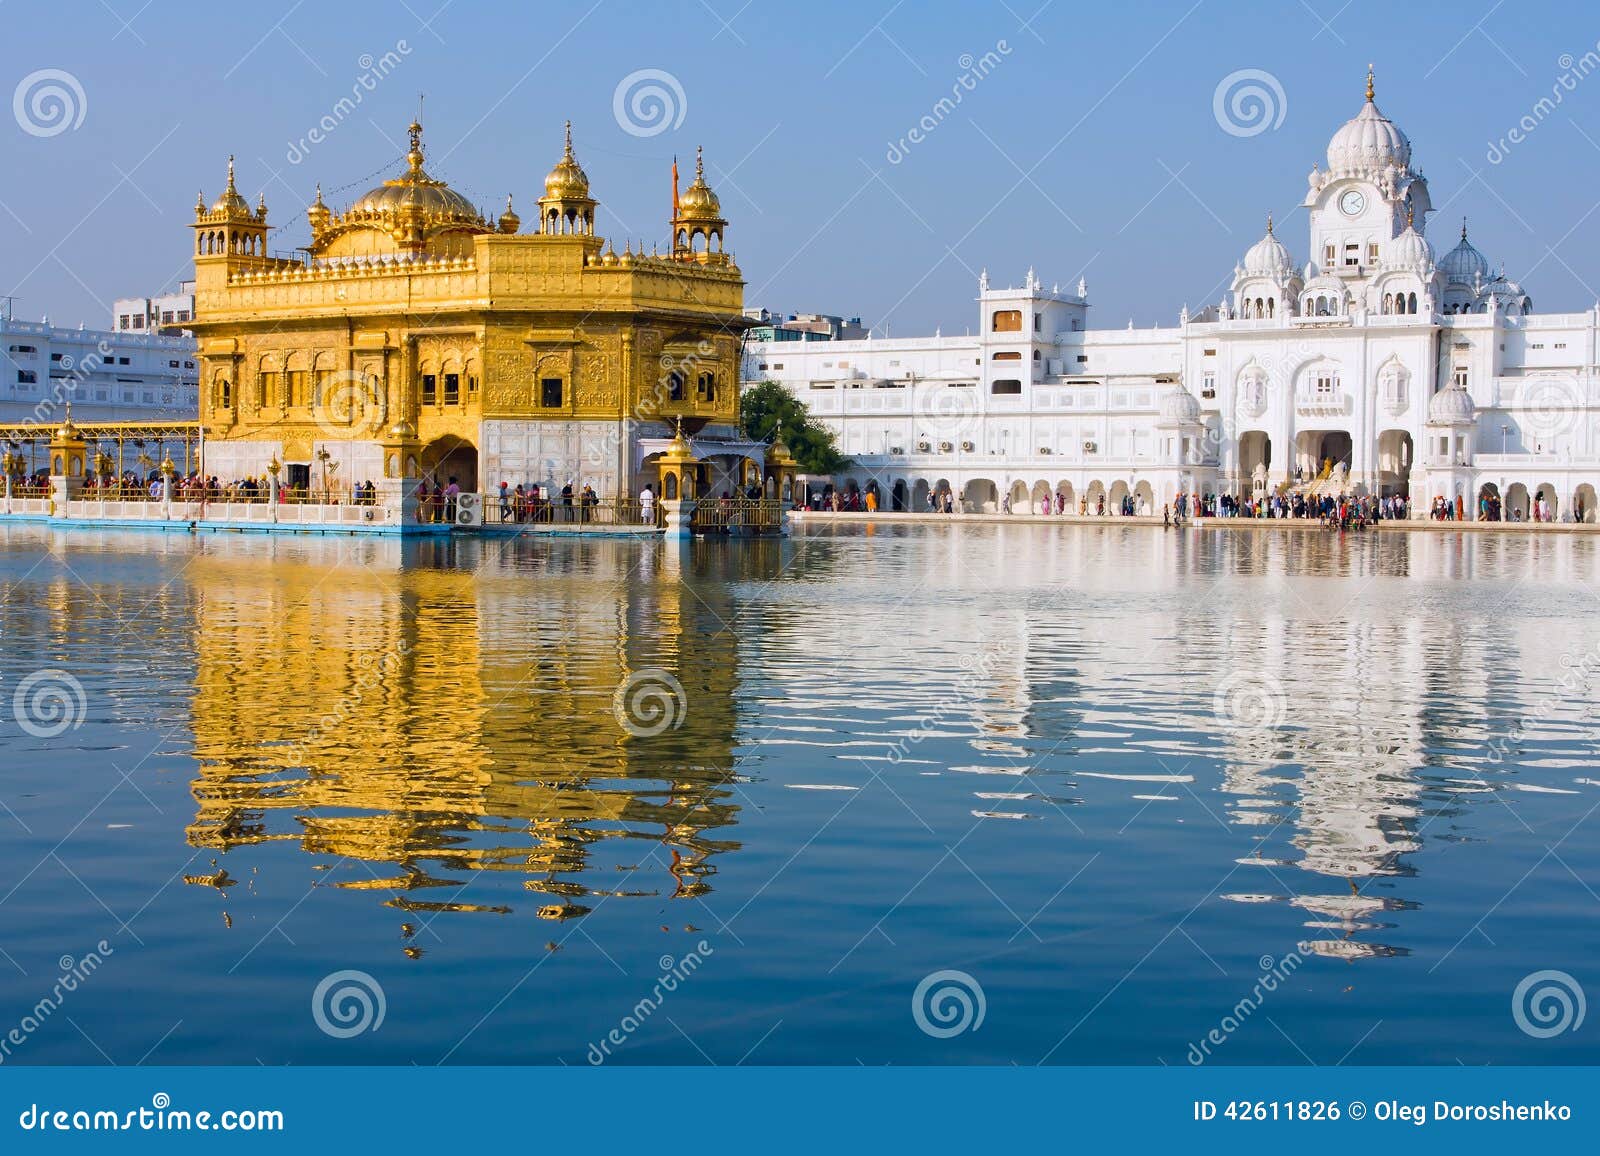 Golden Temple in Amritsar, Punjab, India. Editorial Photo - Image of asian,  architecture: 42611826